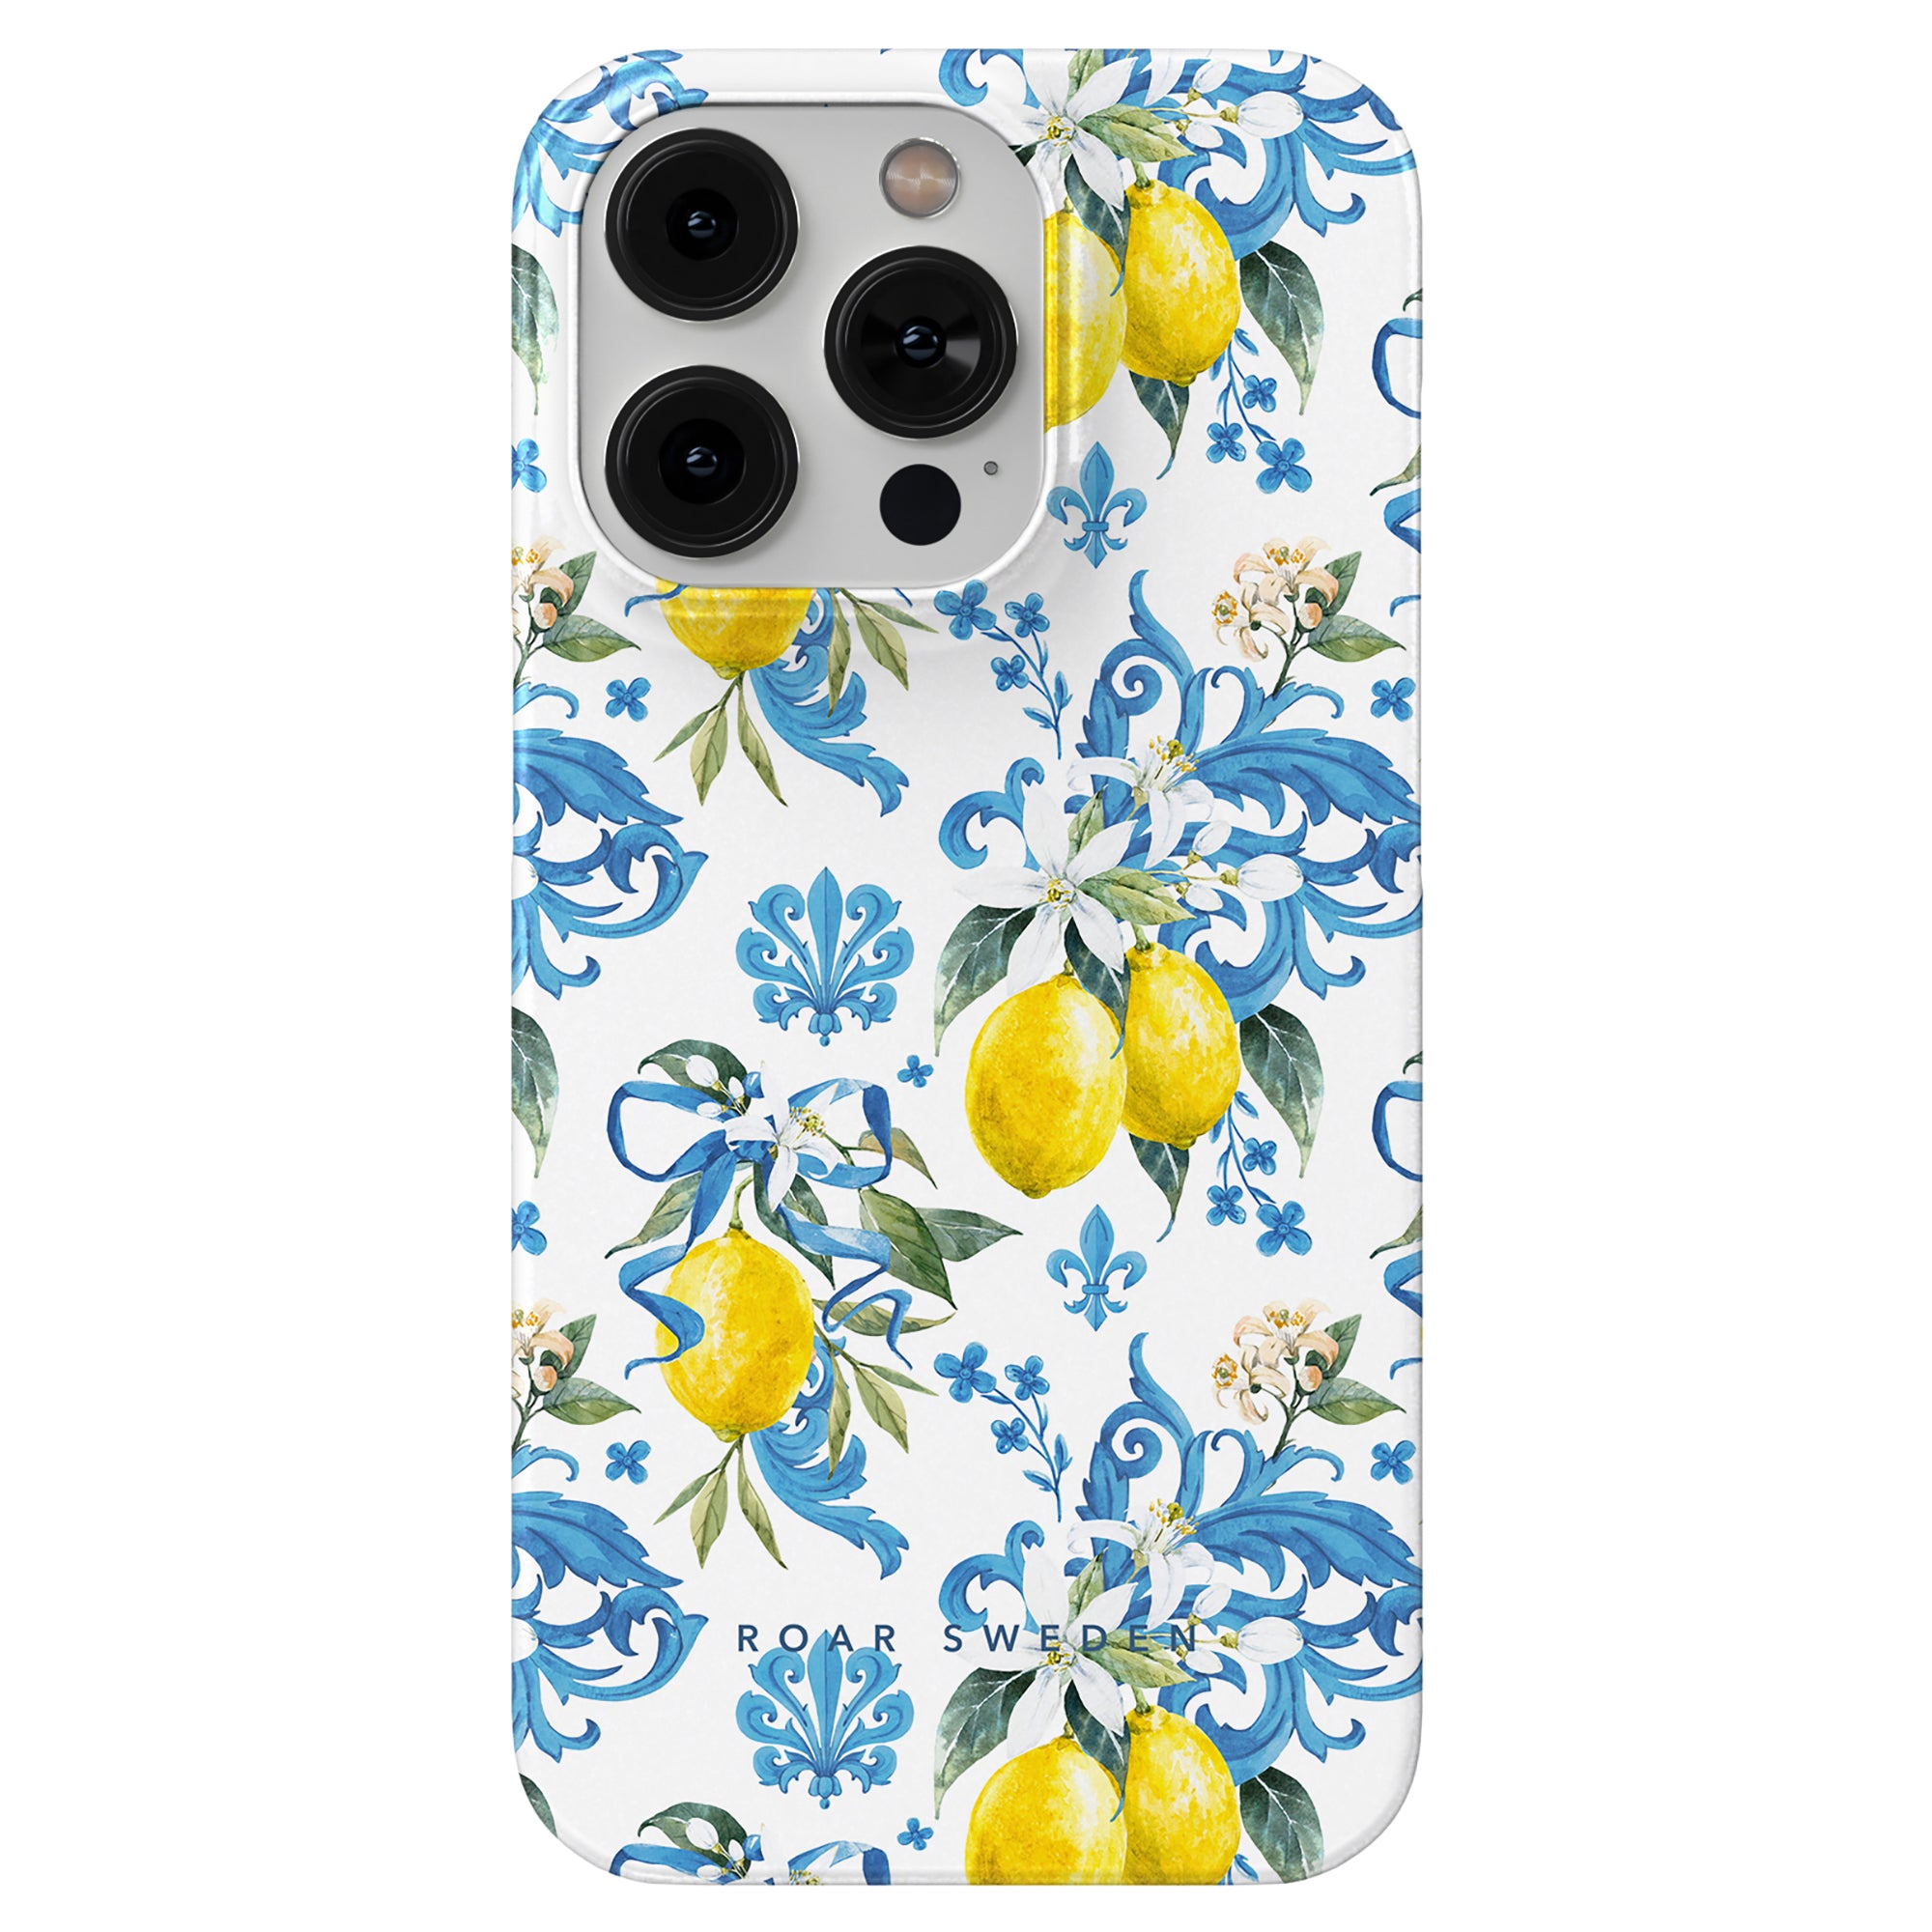 Bianca - Slim case with a lemon and blue floral pattern inspired by Sicilian culture.